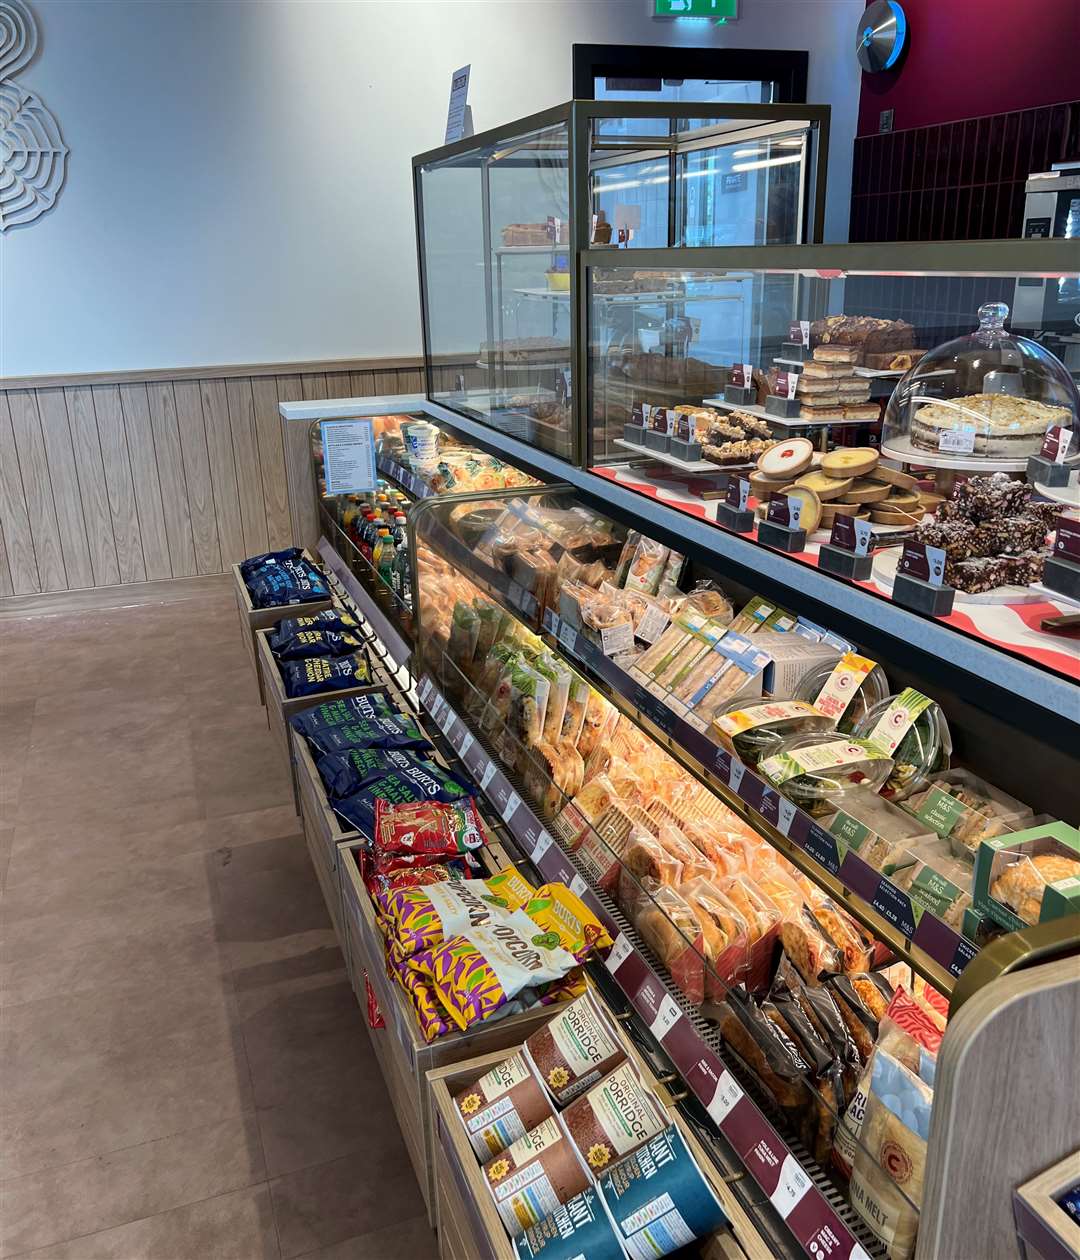 The new store offers a range of hot and cold food and drinks